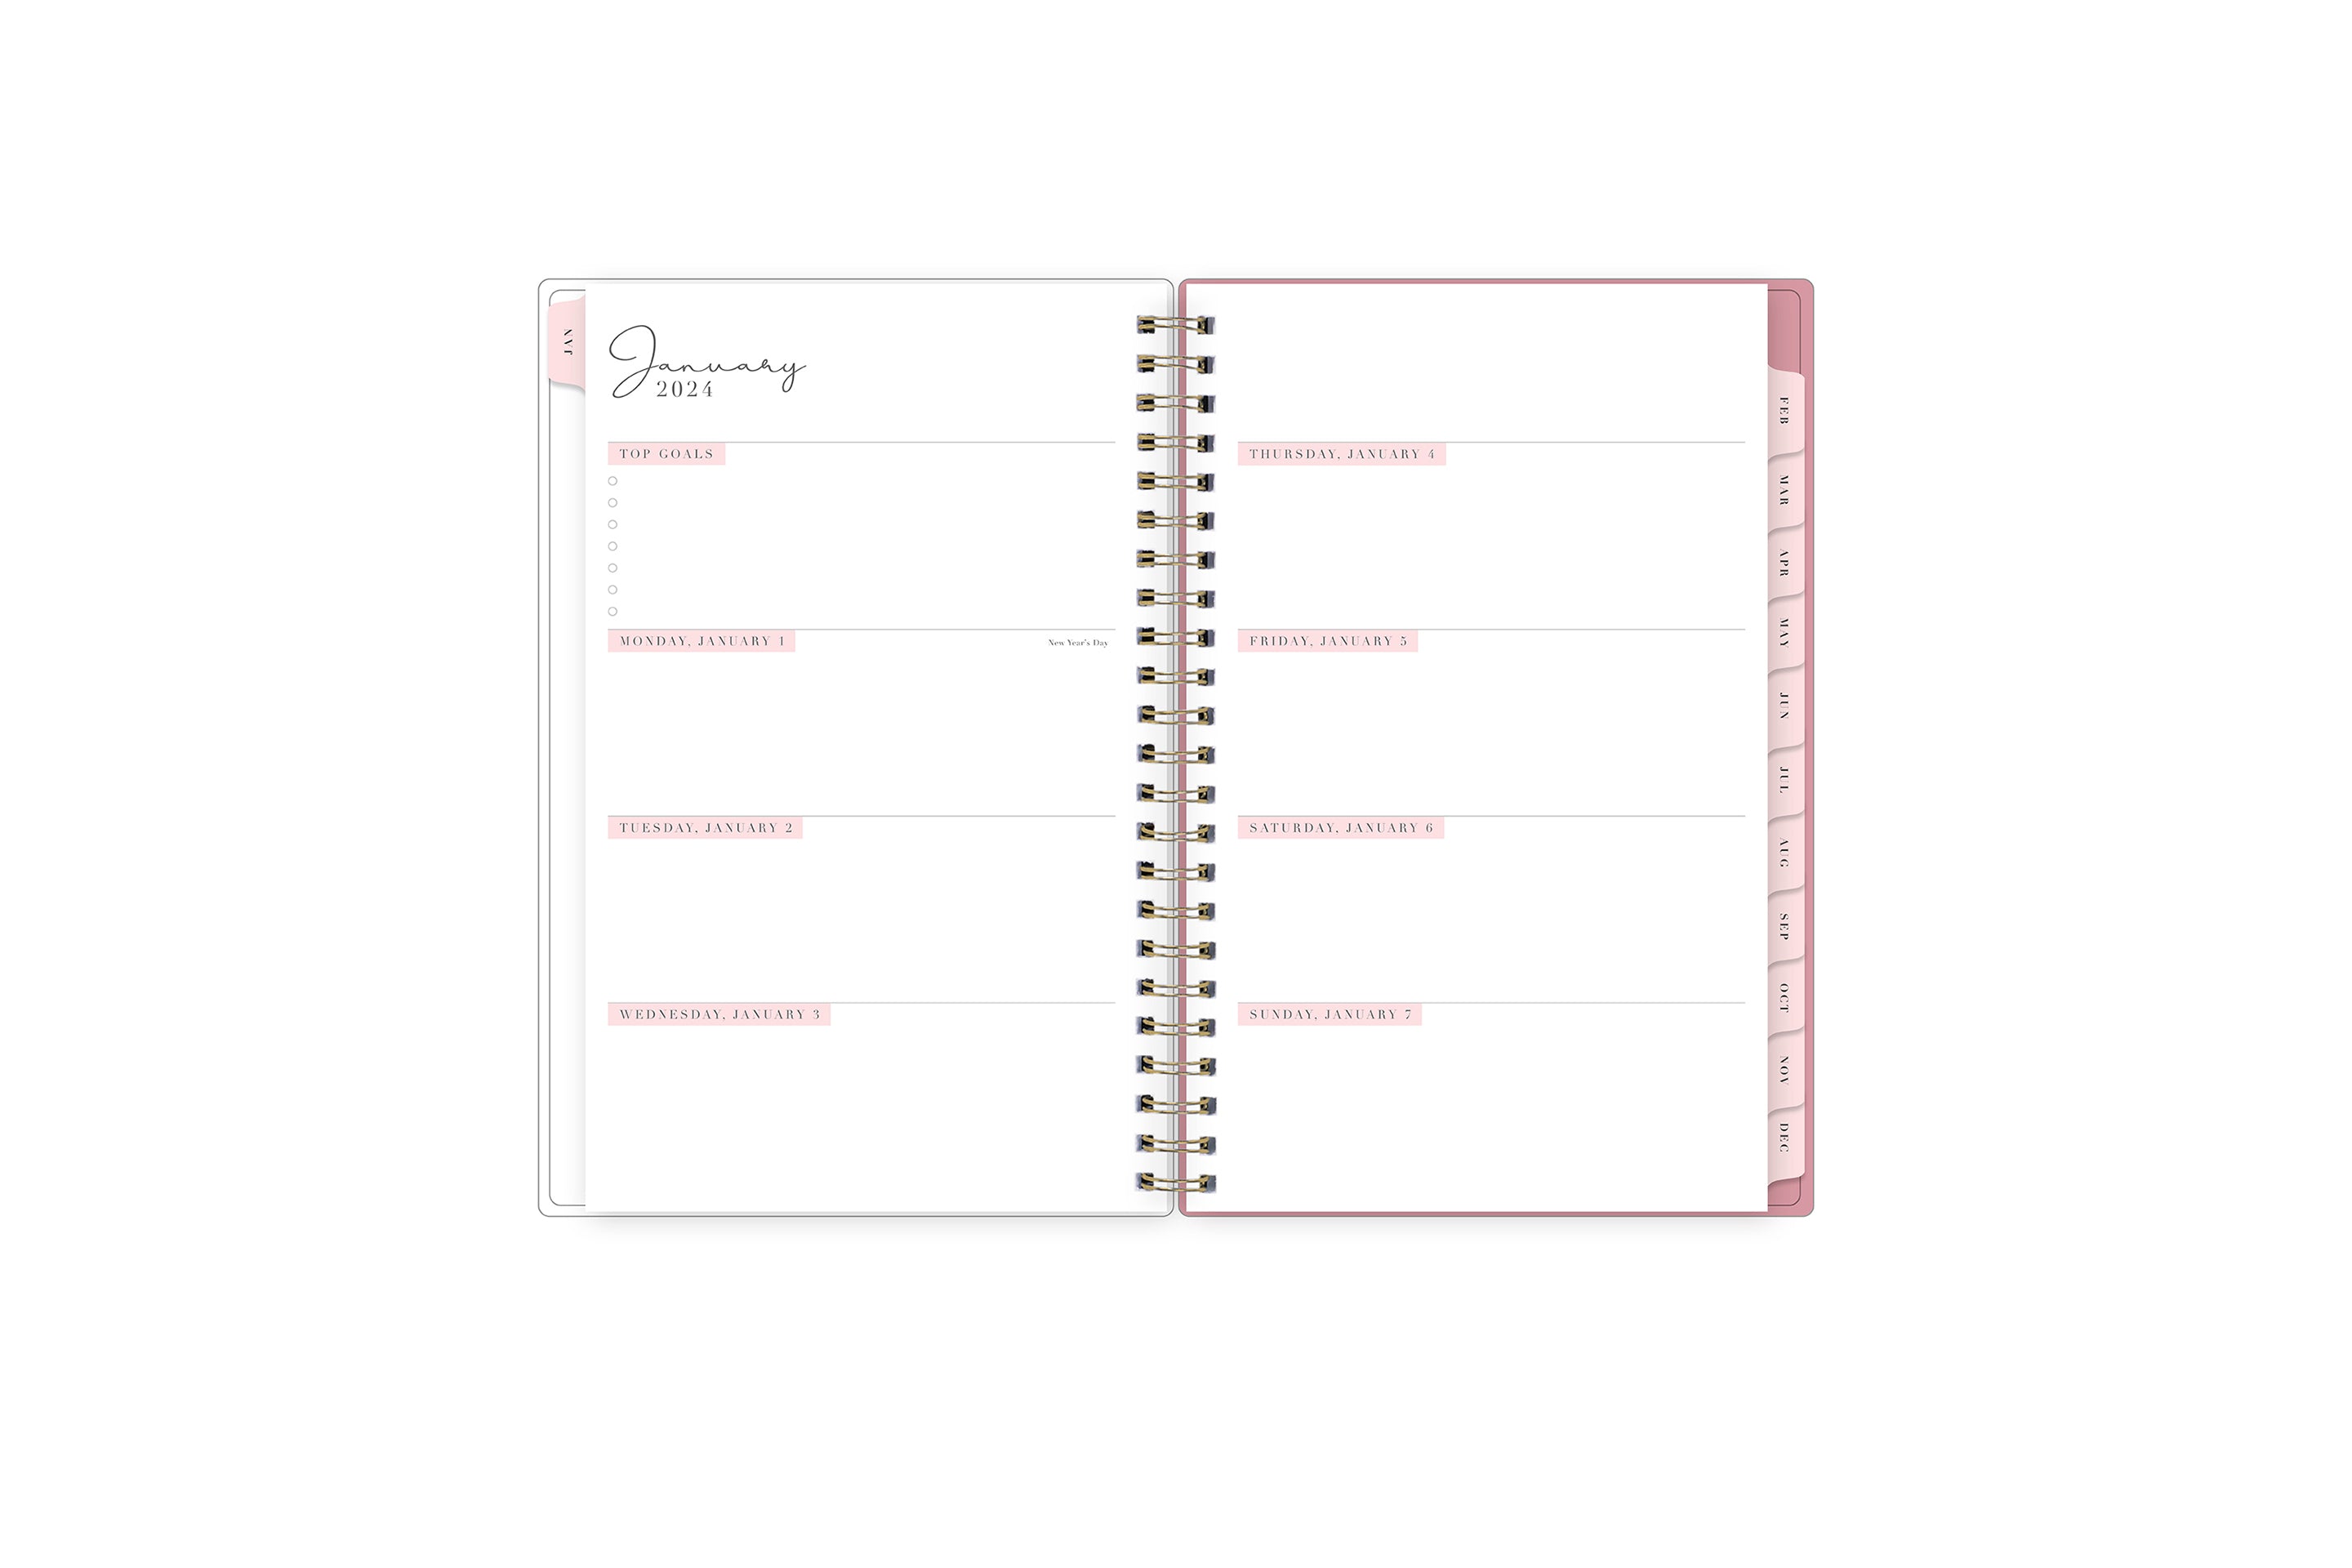 The 2024 Rach parcell planner features a weekly spread view with top goals for the week, blank white writing space for each day, and soft pink monthly tabs.